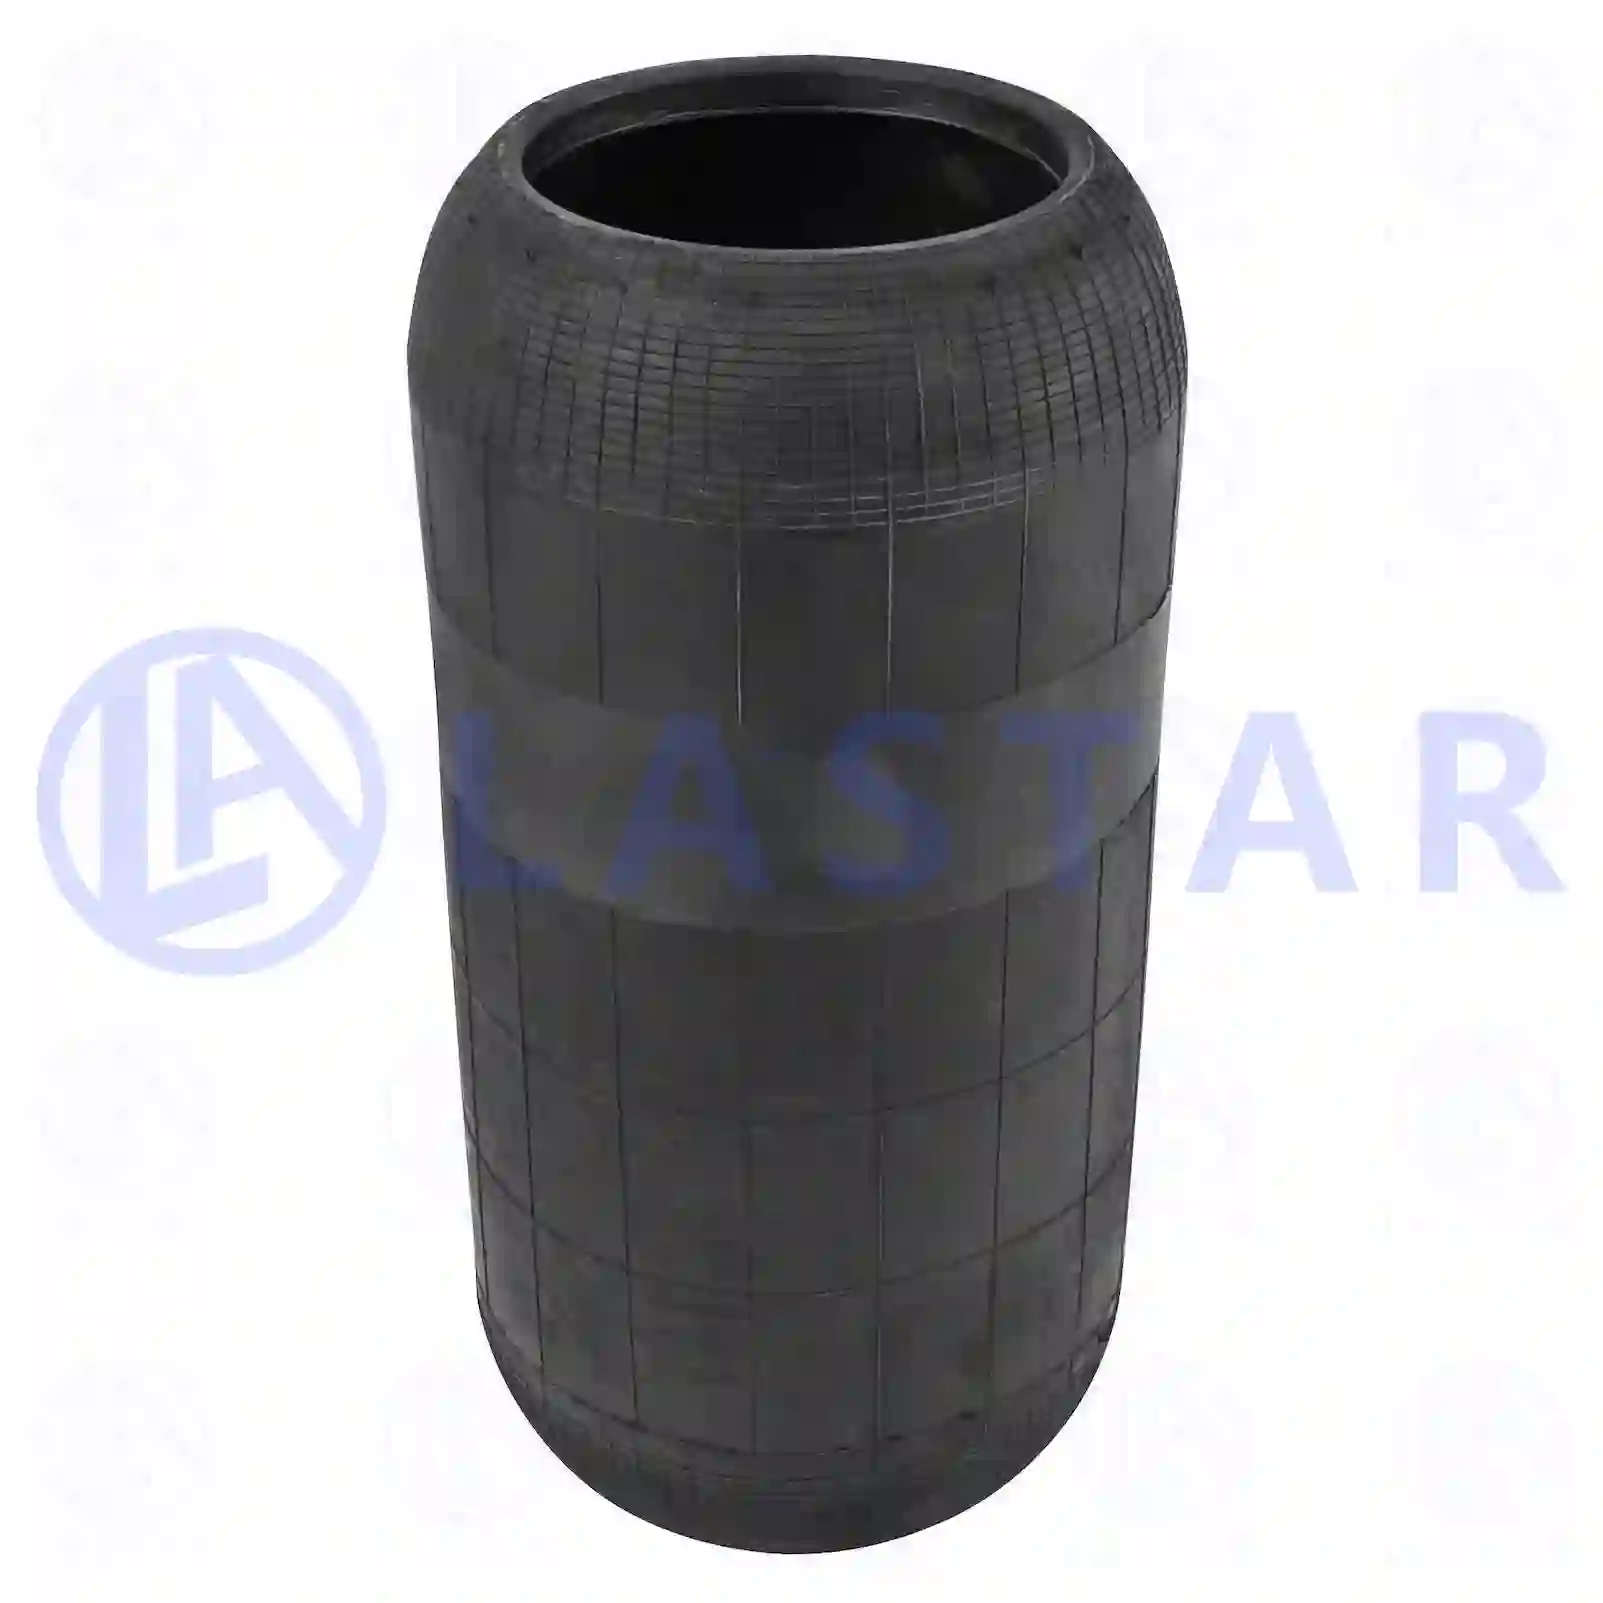 Air spring, without piston, 77728906, 5000288982, 5010151378, 5010151379, 99459166, 0003280001, 5000288982, 5010151378, 5010151379 ||  77728906 Lastar Spare Part | Truck Spare Parts, Auotomotive Spare Parts Air spring, without piston, 77728906, 5000288982, 5010151378, 5010151379, 99459166, 0003280001, 5000288982, 5010151378, 5010151379 ||  77728906 Lastar Spare Part | Truck Spare Parts, Auotomotive Spare Parts